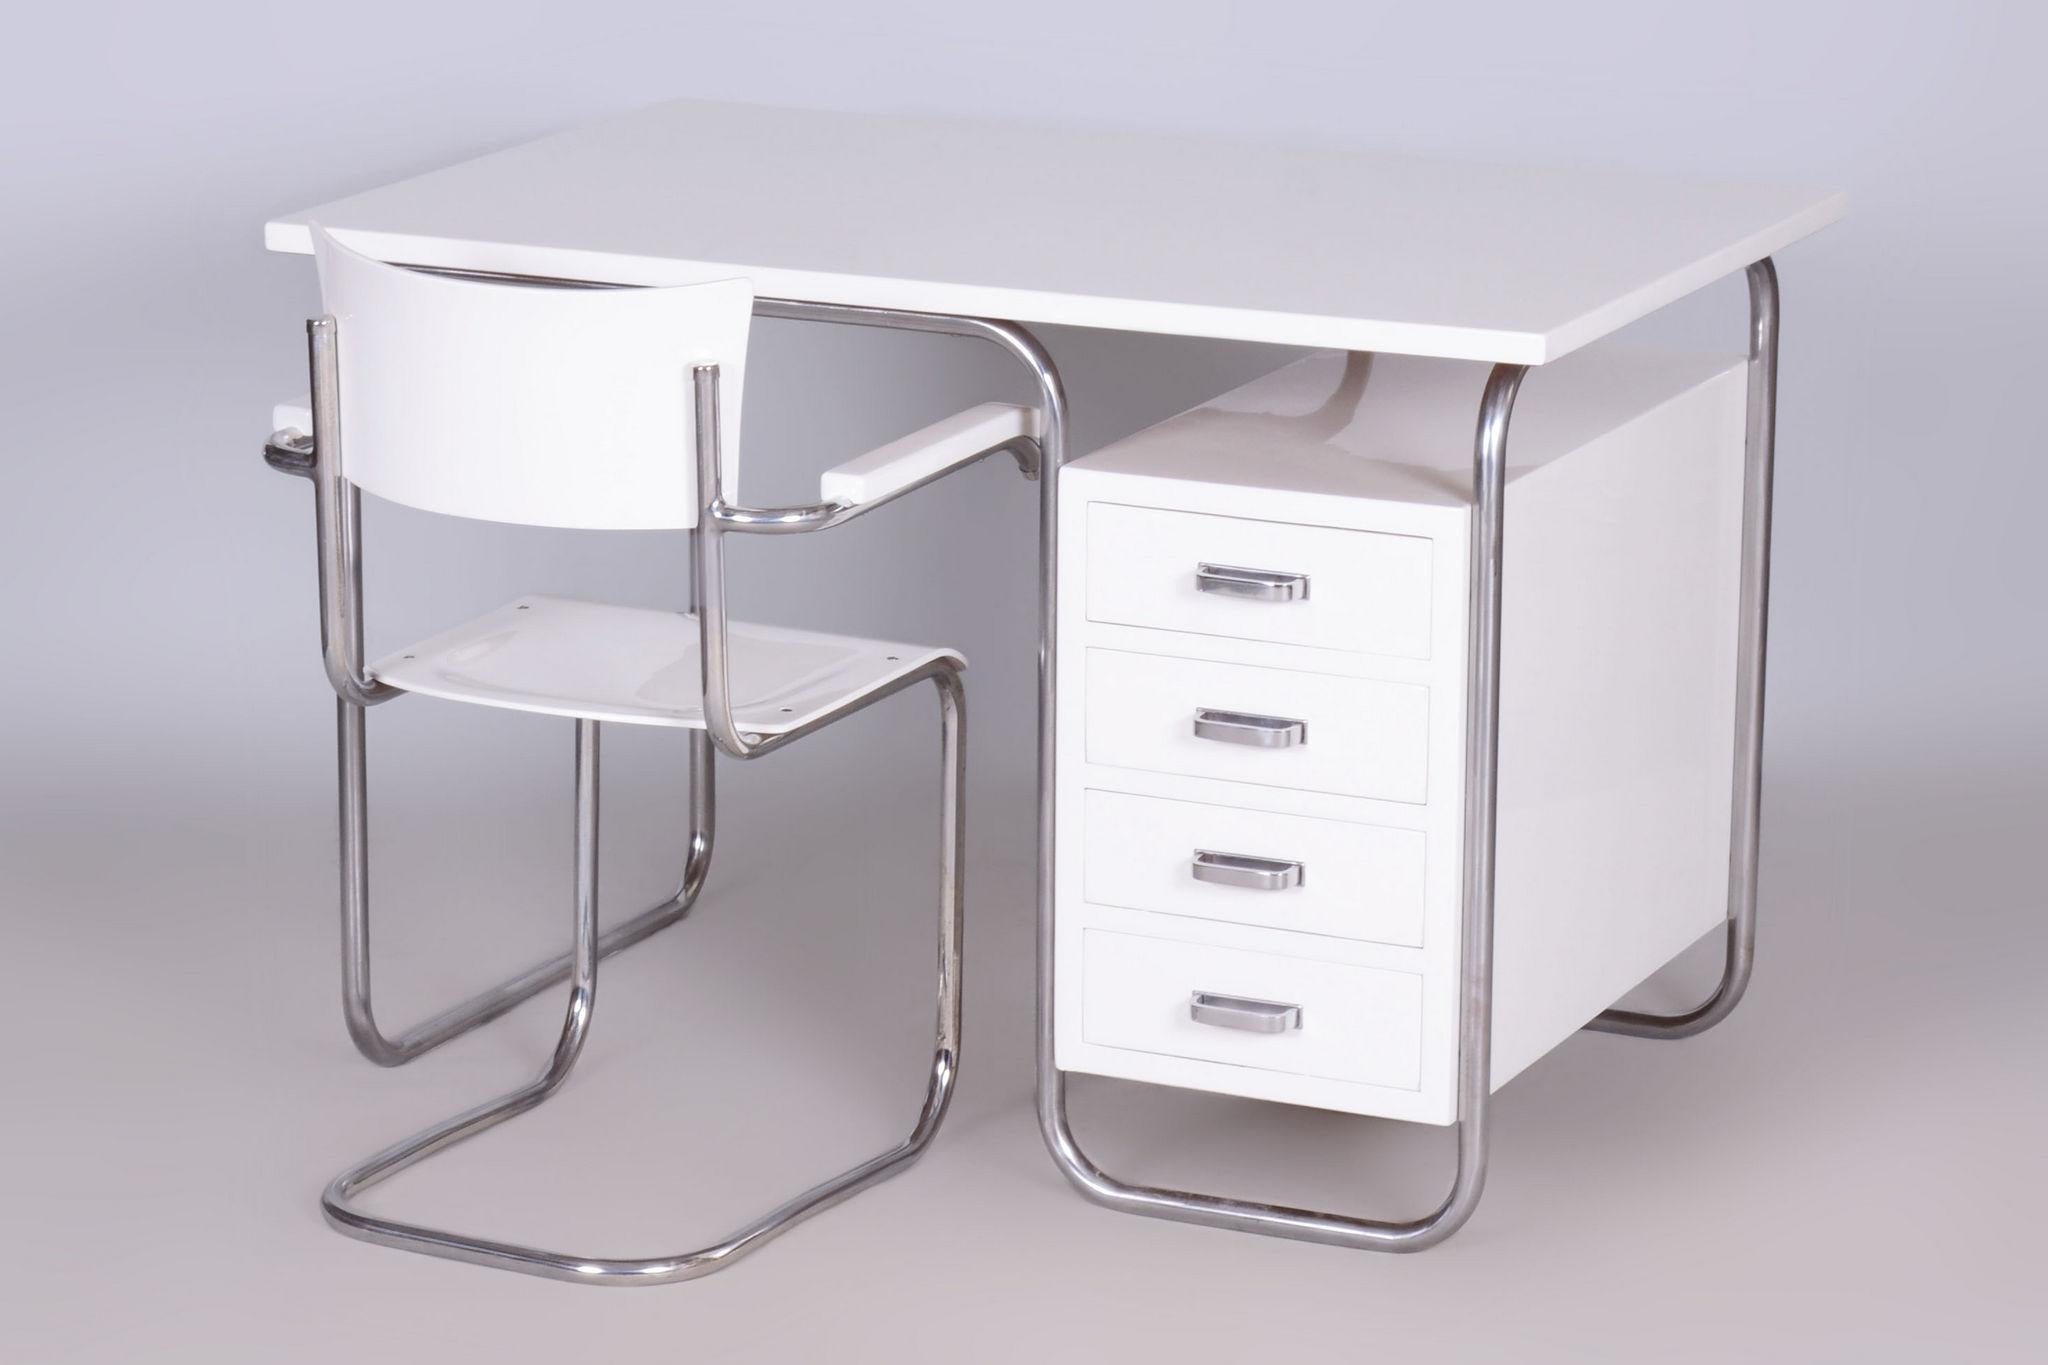 Restored Bauhaus Writing Desk With Chair, Chrome, Steel, Wood, Czech, 1930s For Sale 1